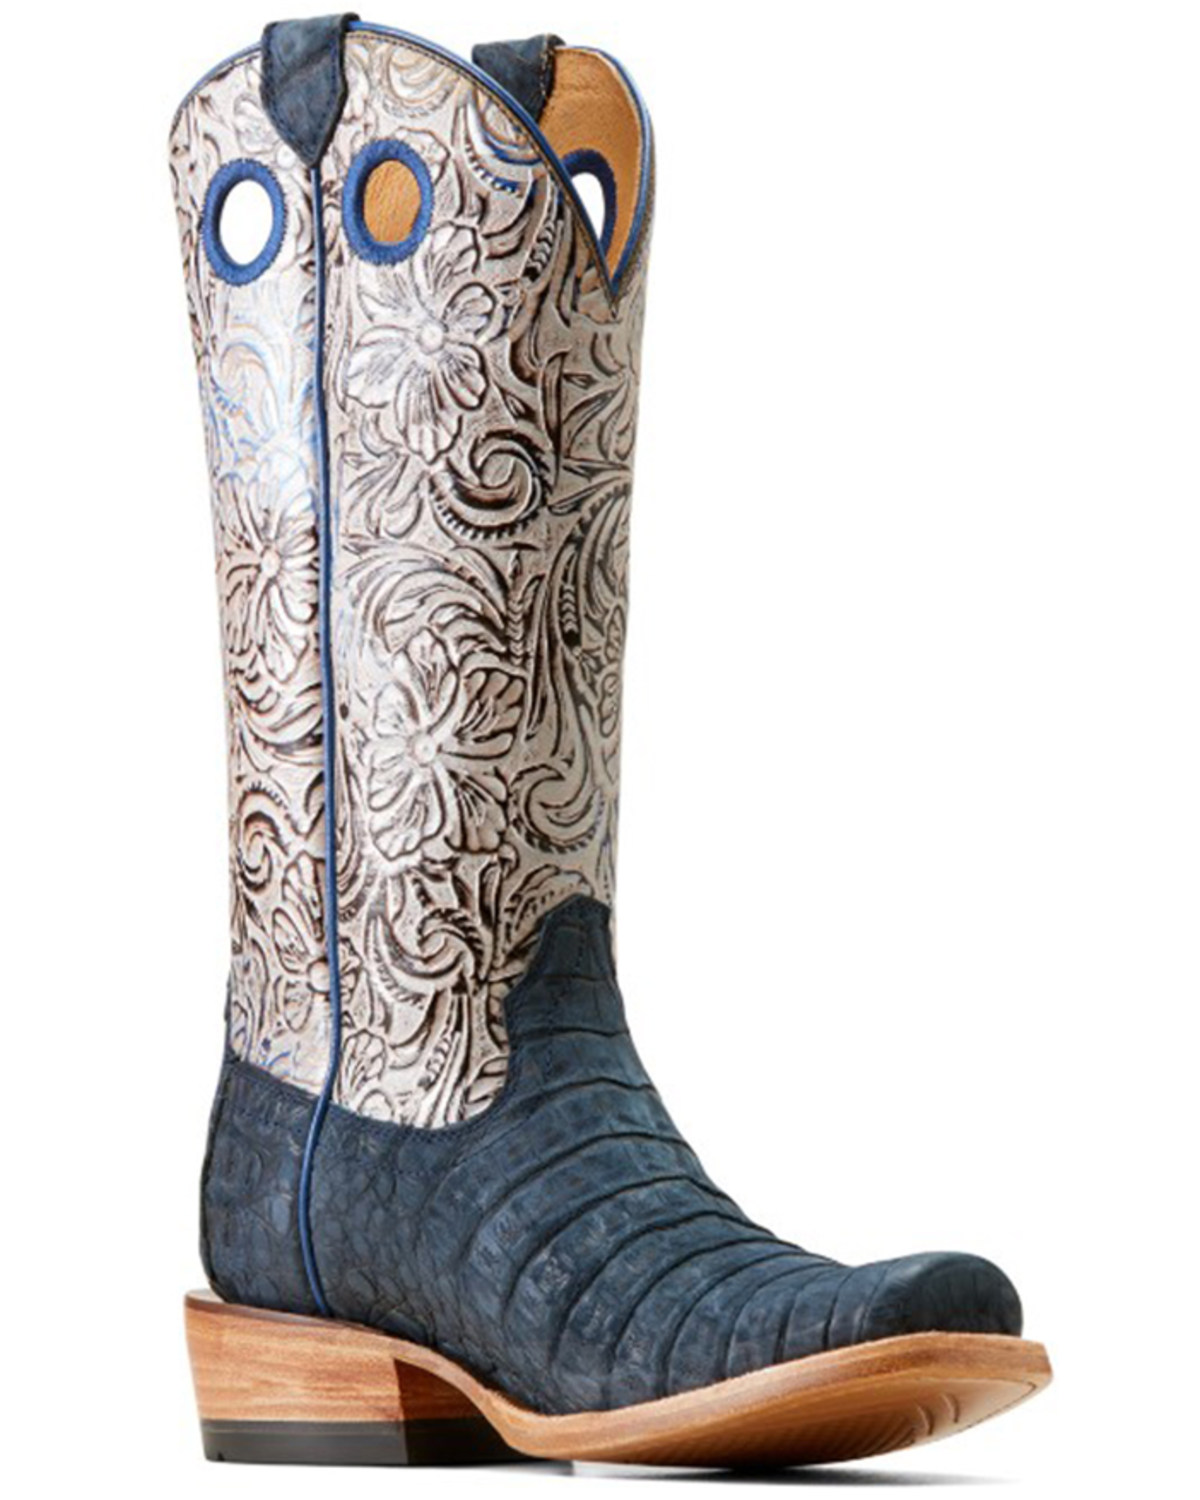 Ariat Women's Futurity Boon Exotic Caiman Western Boots - Square Toe